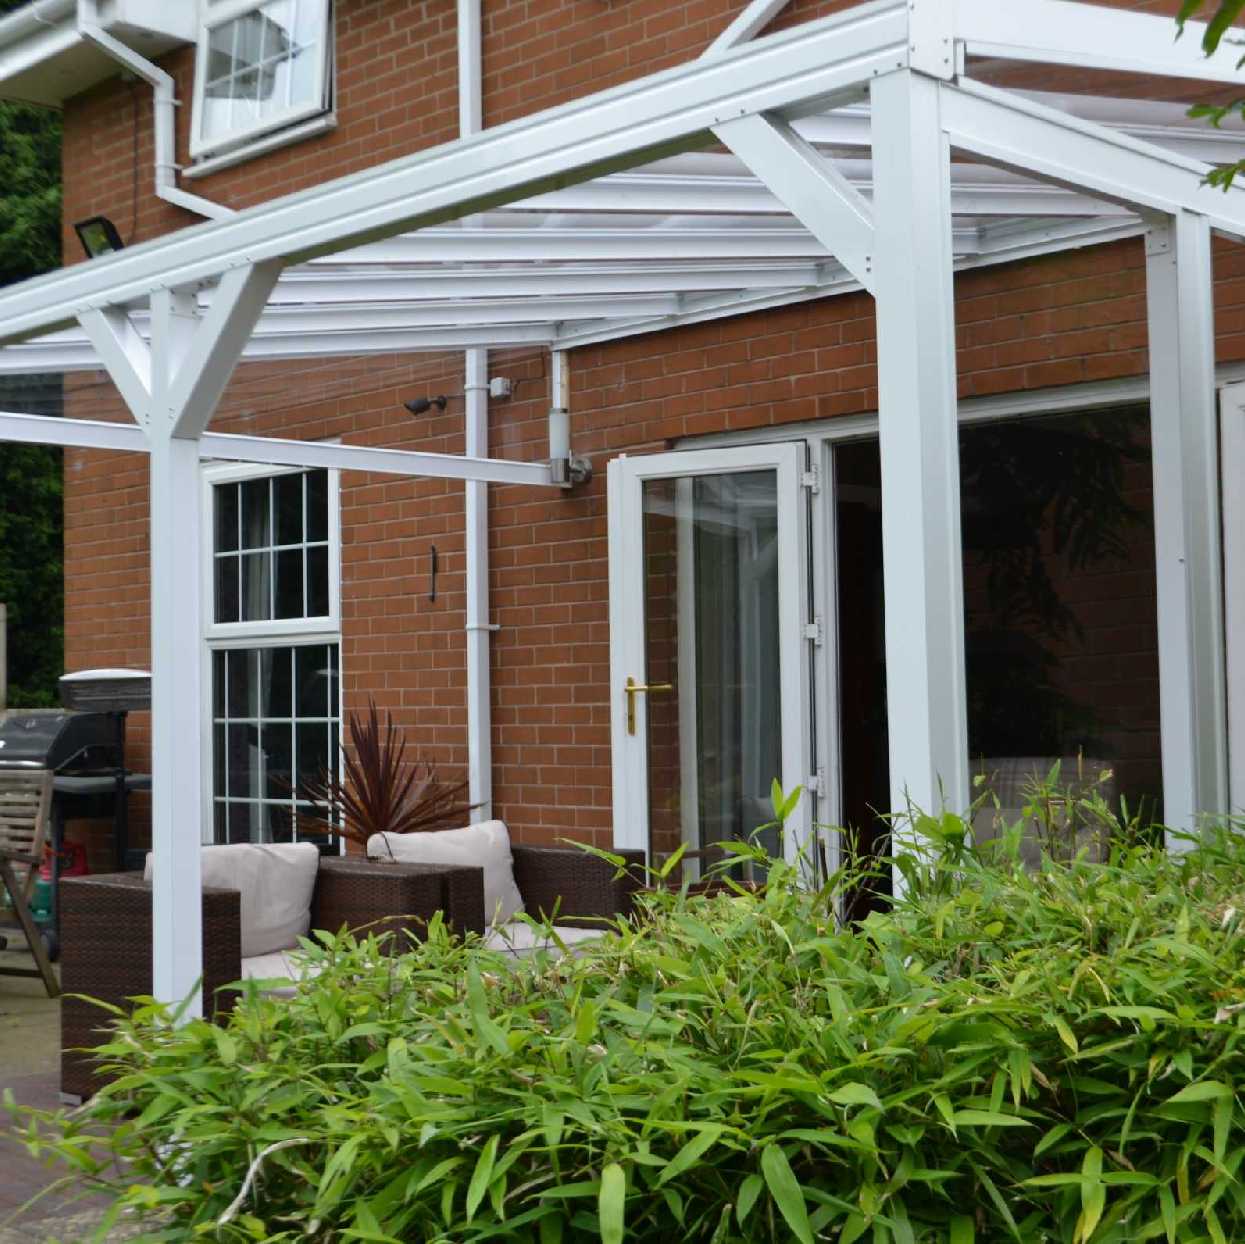 Omega Smart Lean-To Canopy, White with 6mm Glass Clear Plate Polycarbonate Glazing - 5.2m (W) x 4.0m (P), (3) Supporting Posts from Omega Build